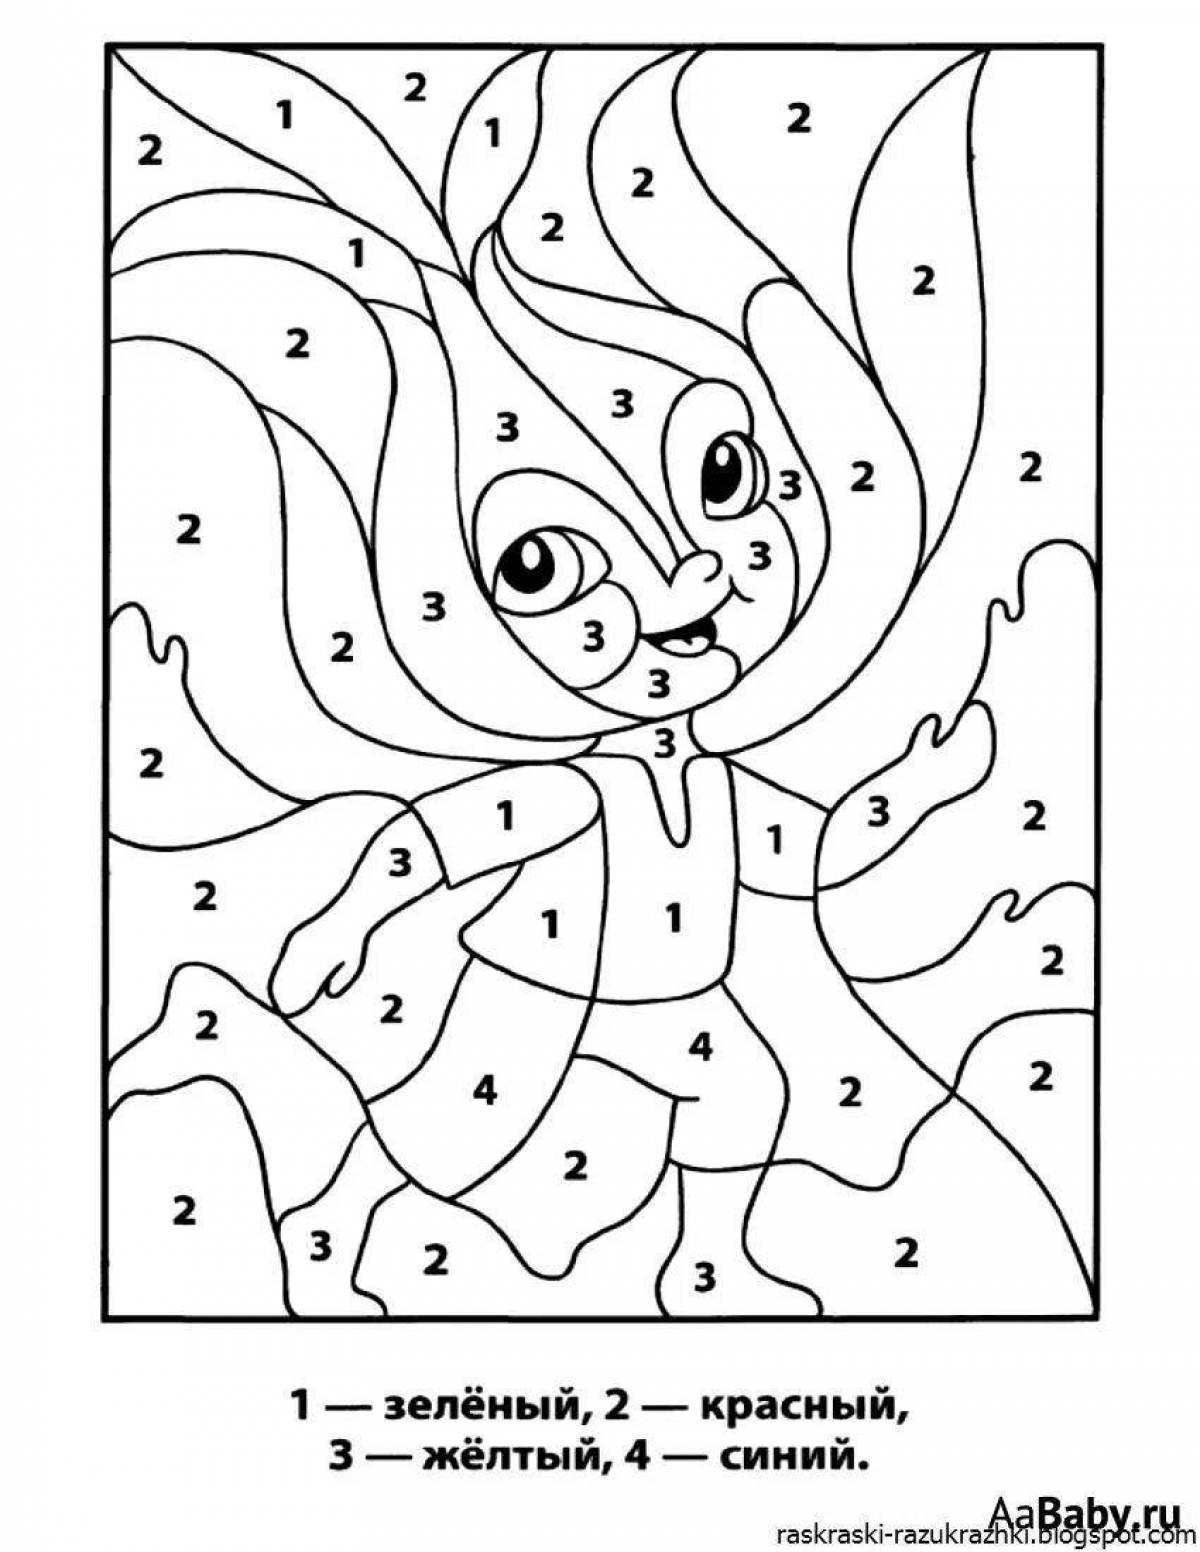 Colorful coloring page simple by numbers